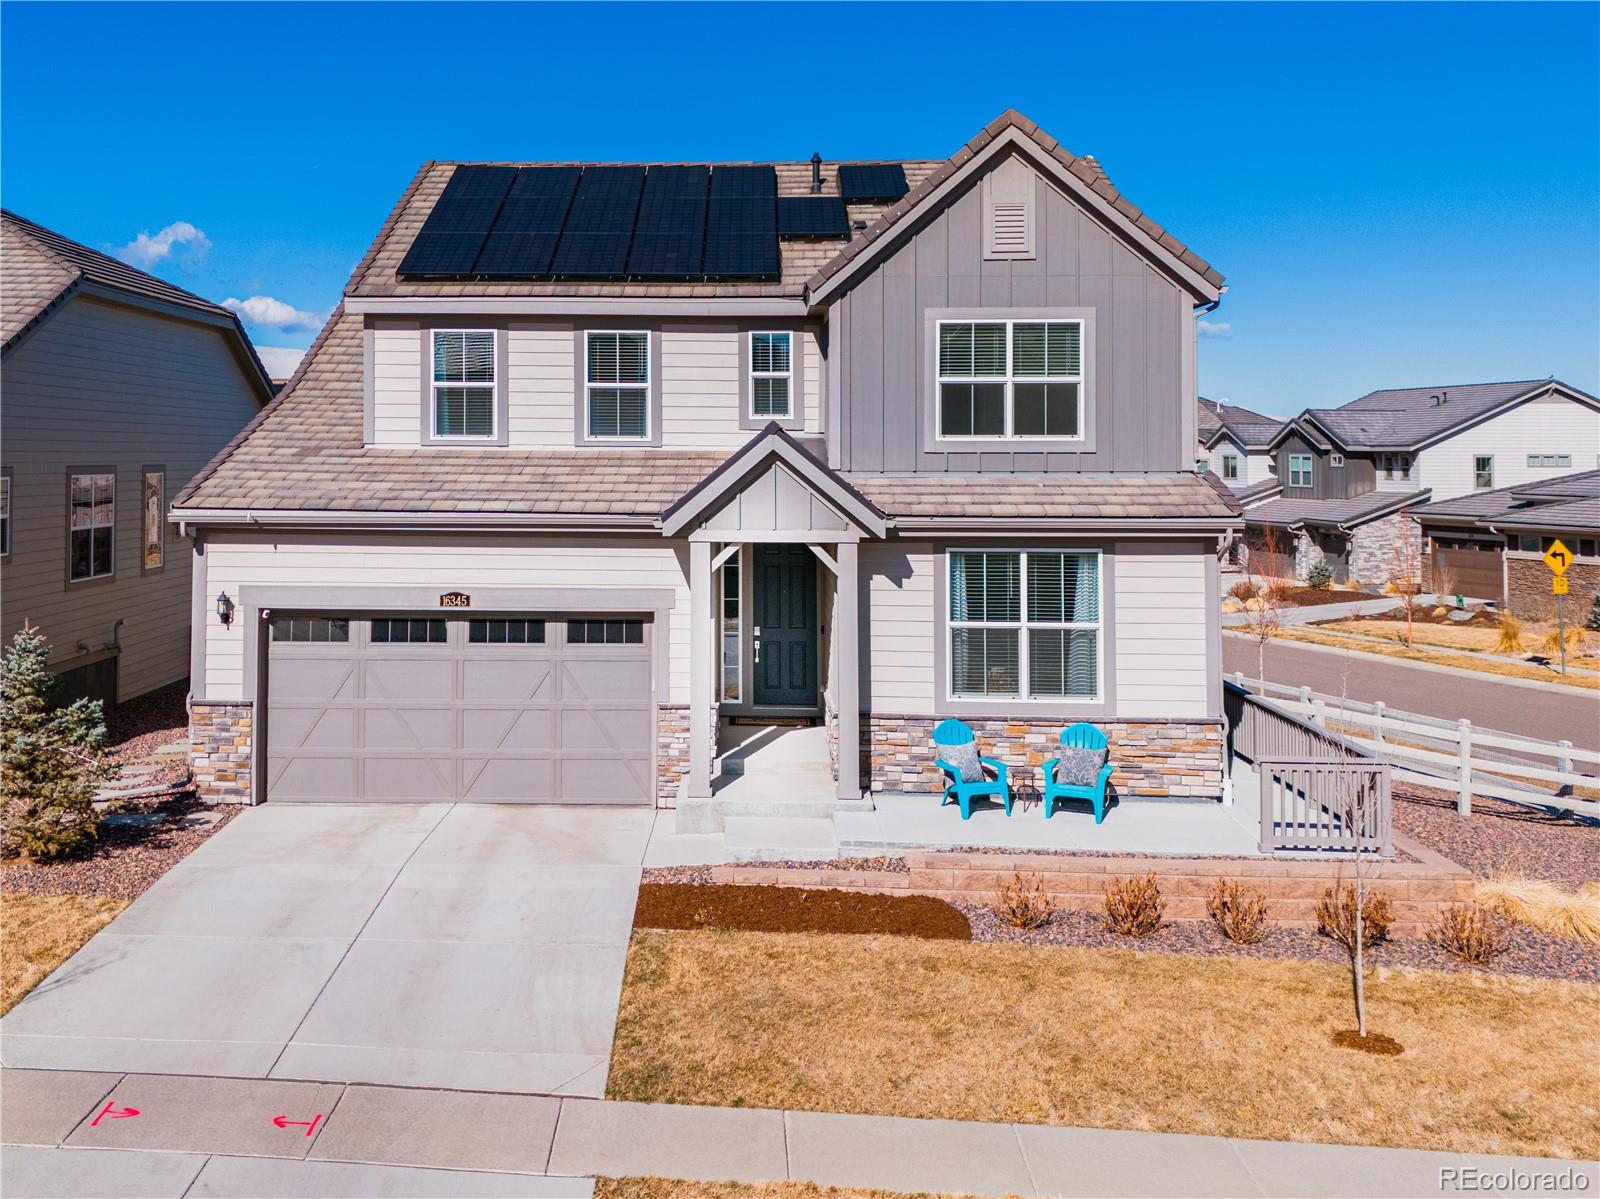 16345  sand mountain way, Broomfield sold home. Closed on 2024-04-26 for $985,000.